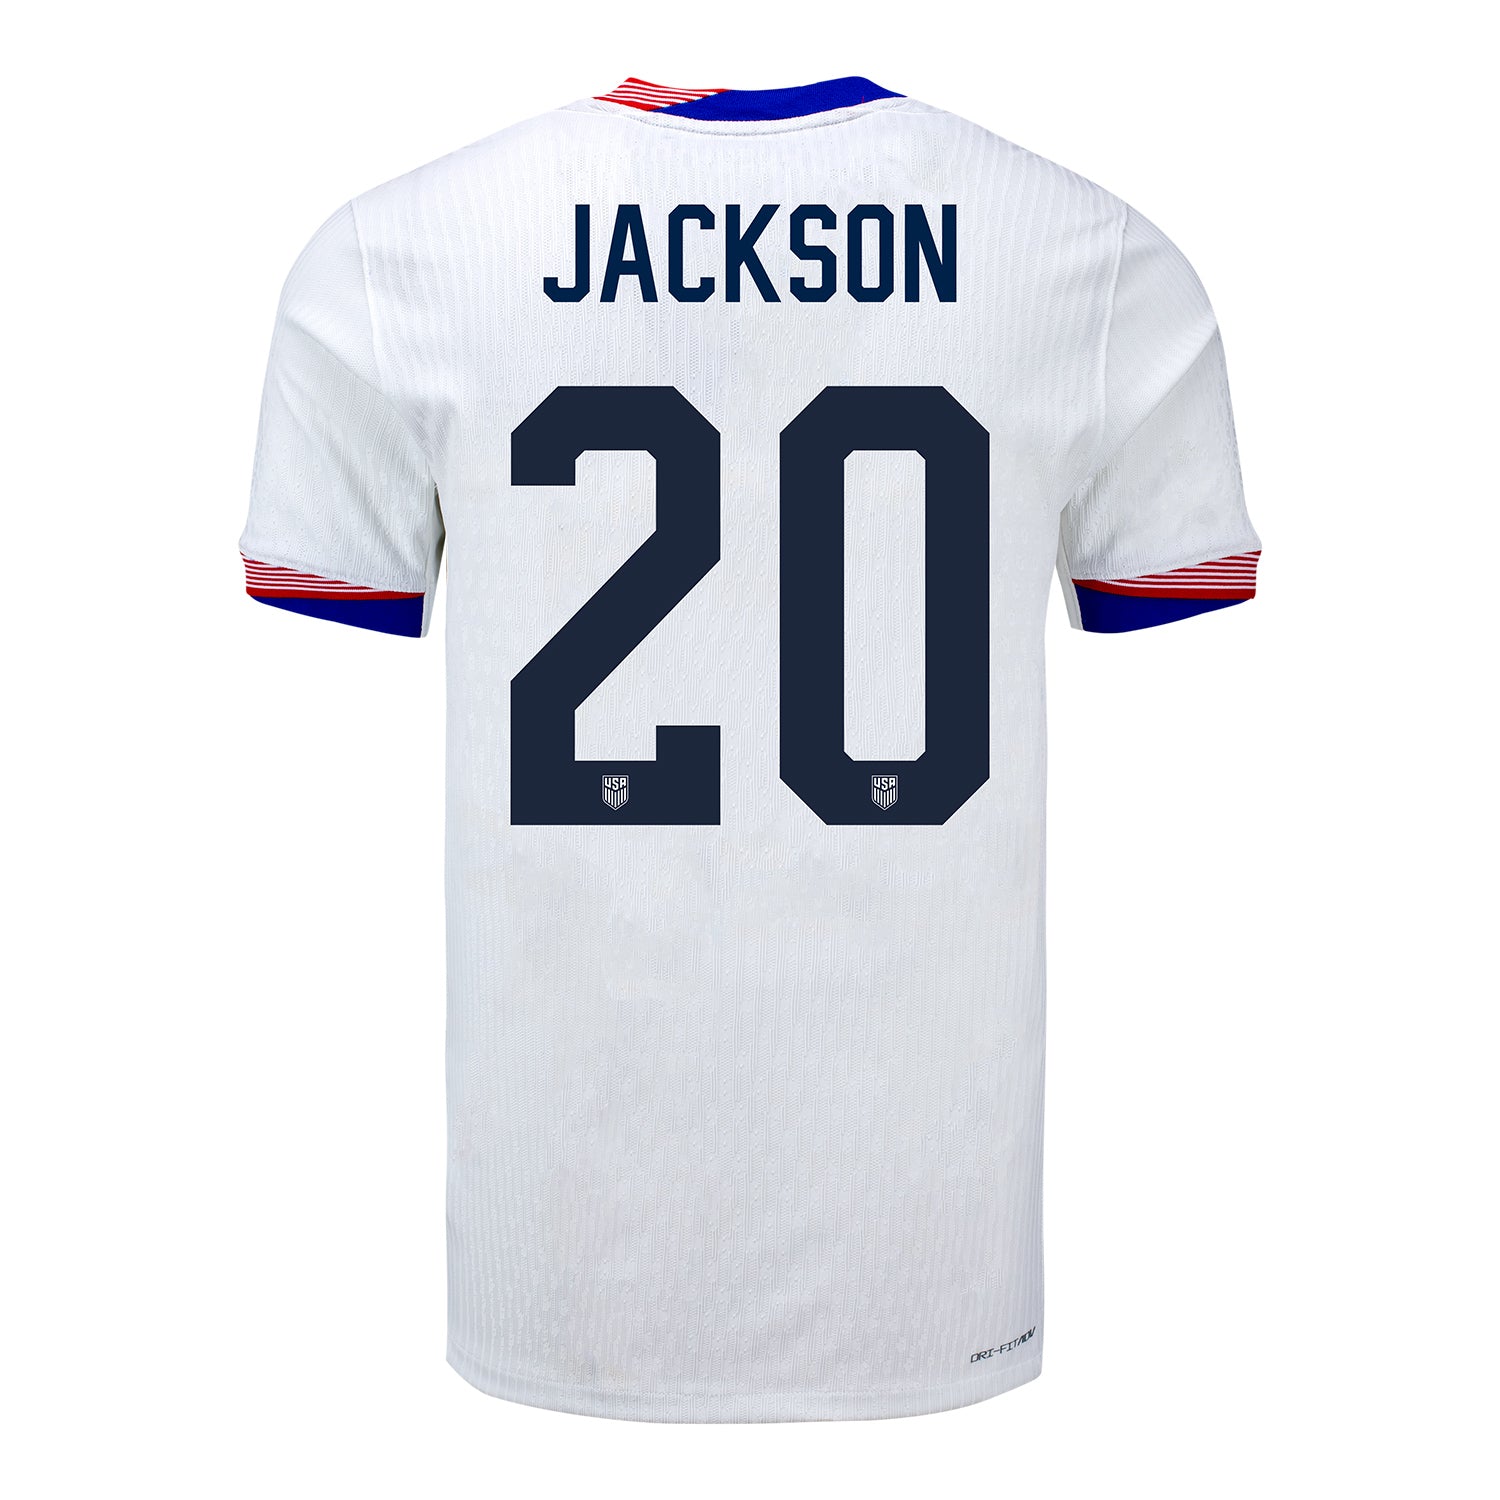 Men's Nike USMNT 2024 Personalized American Classic Home Match Jersey - Back View